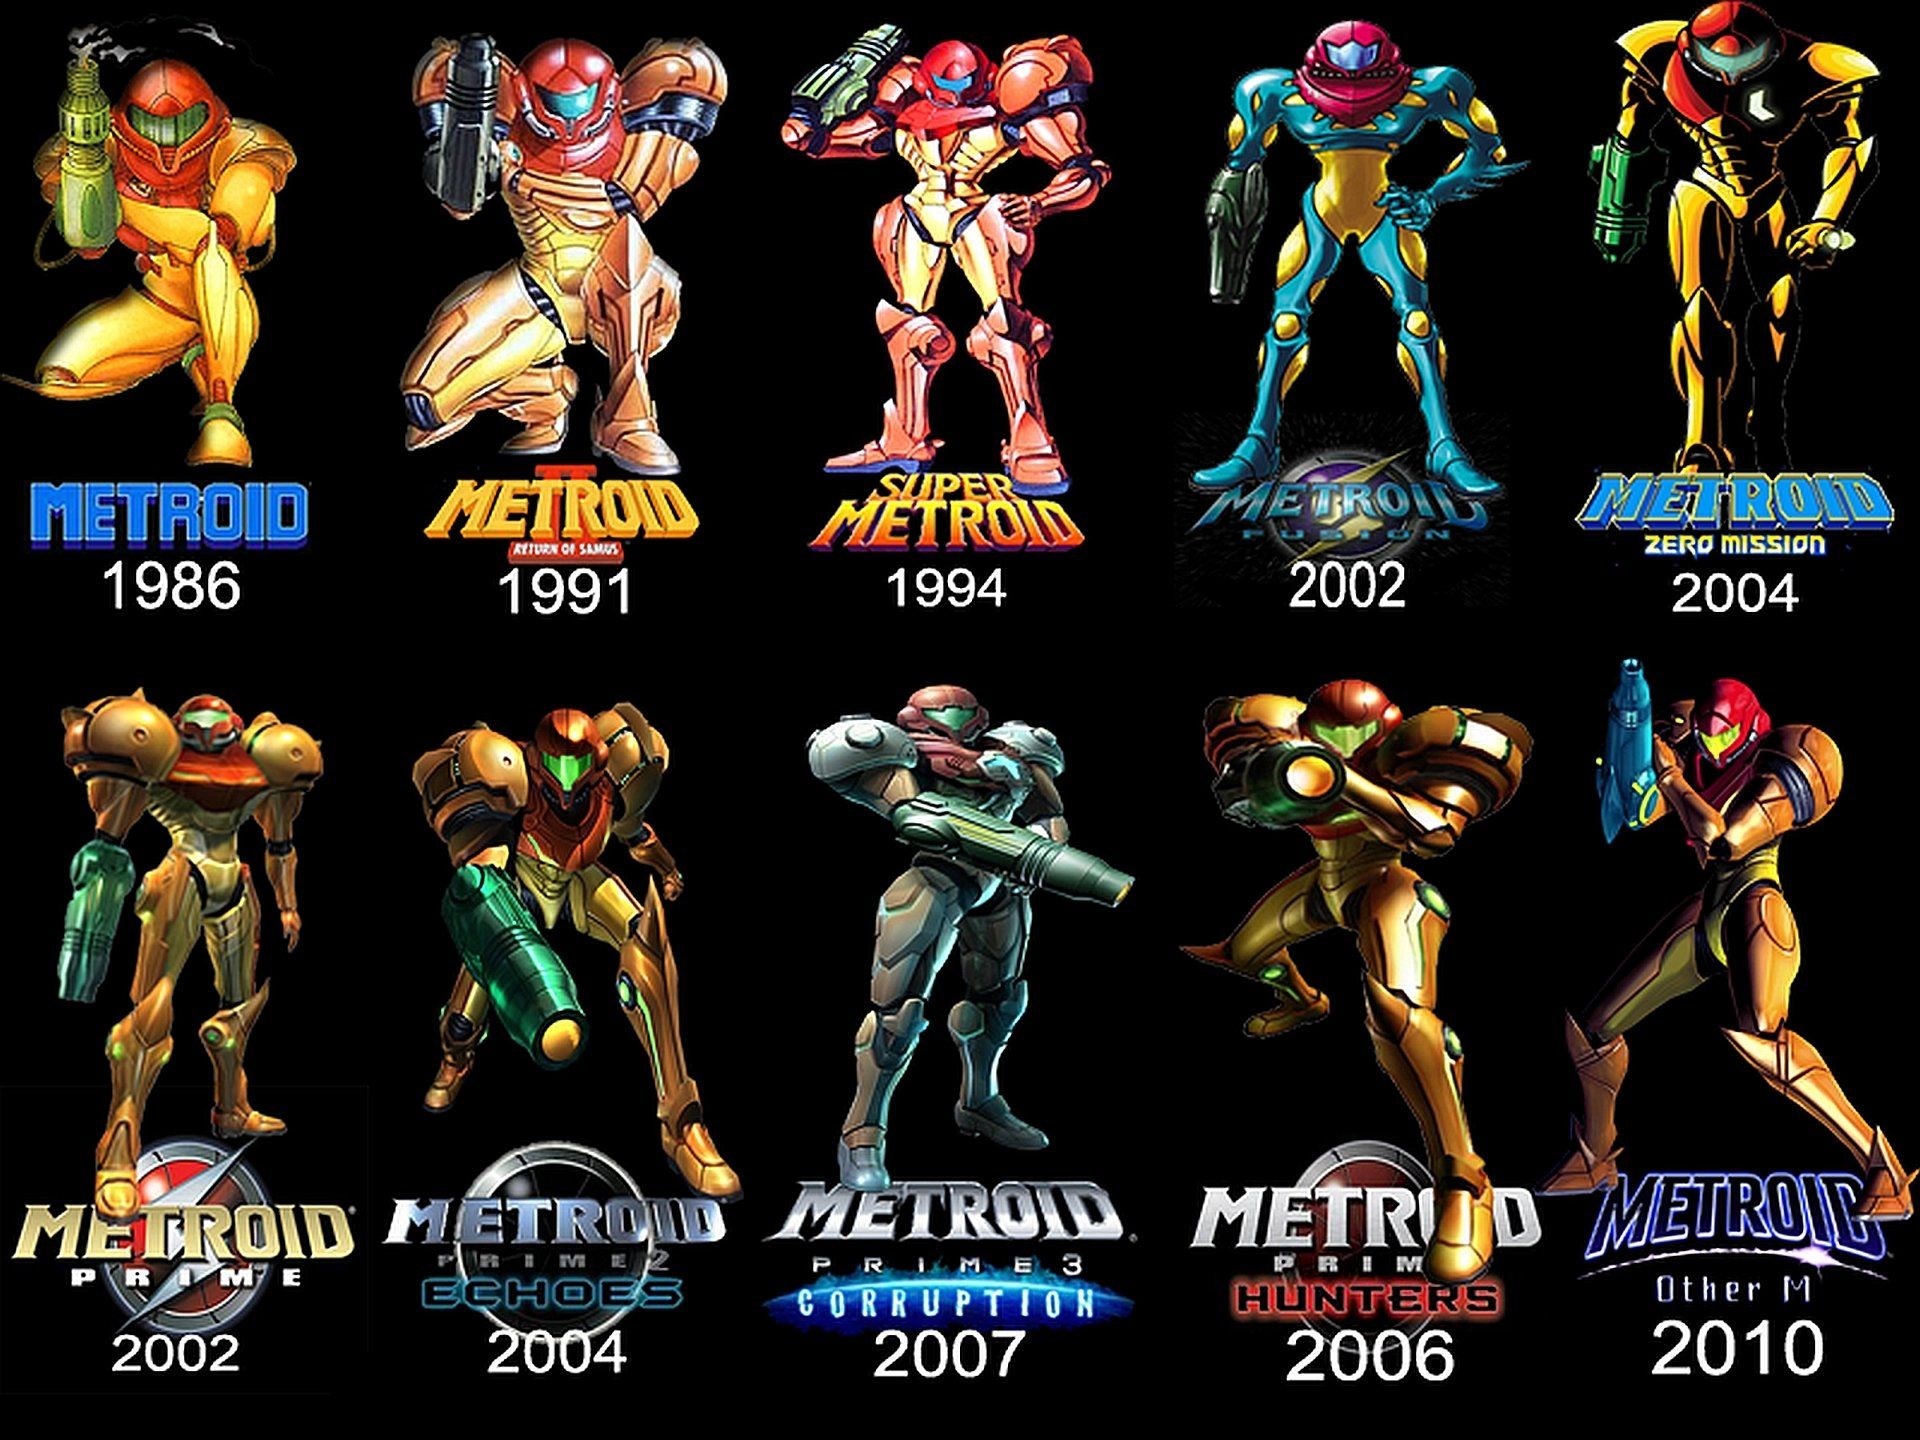 download metroid other m on switch for free